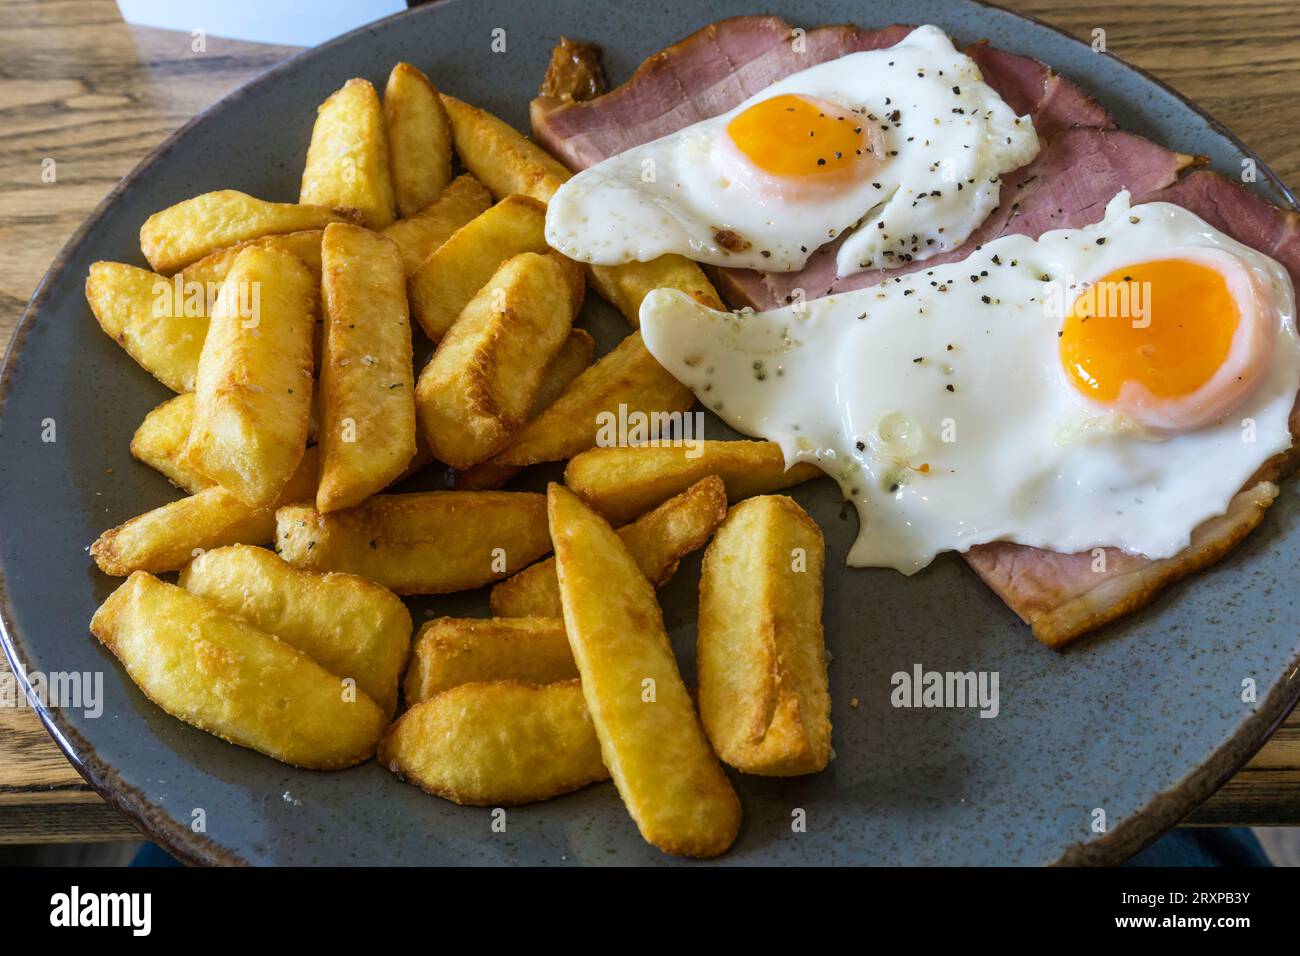 A typical English pub meal of ham, egg and chips. Stock Photo